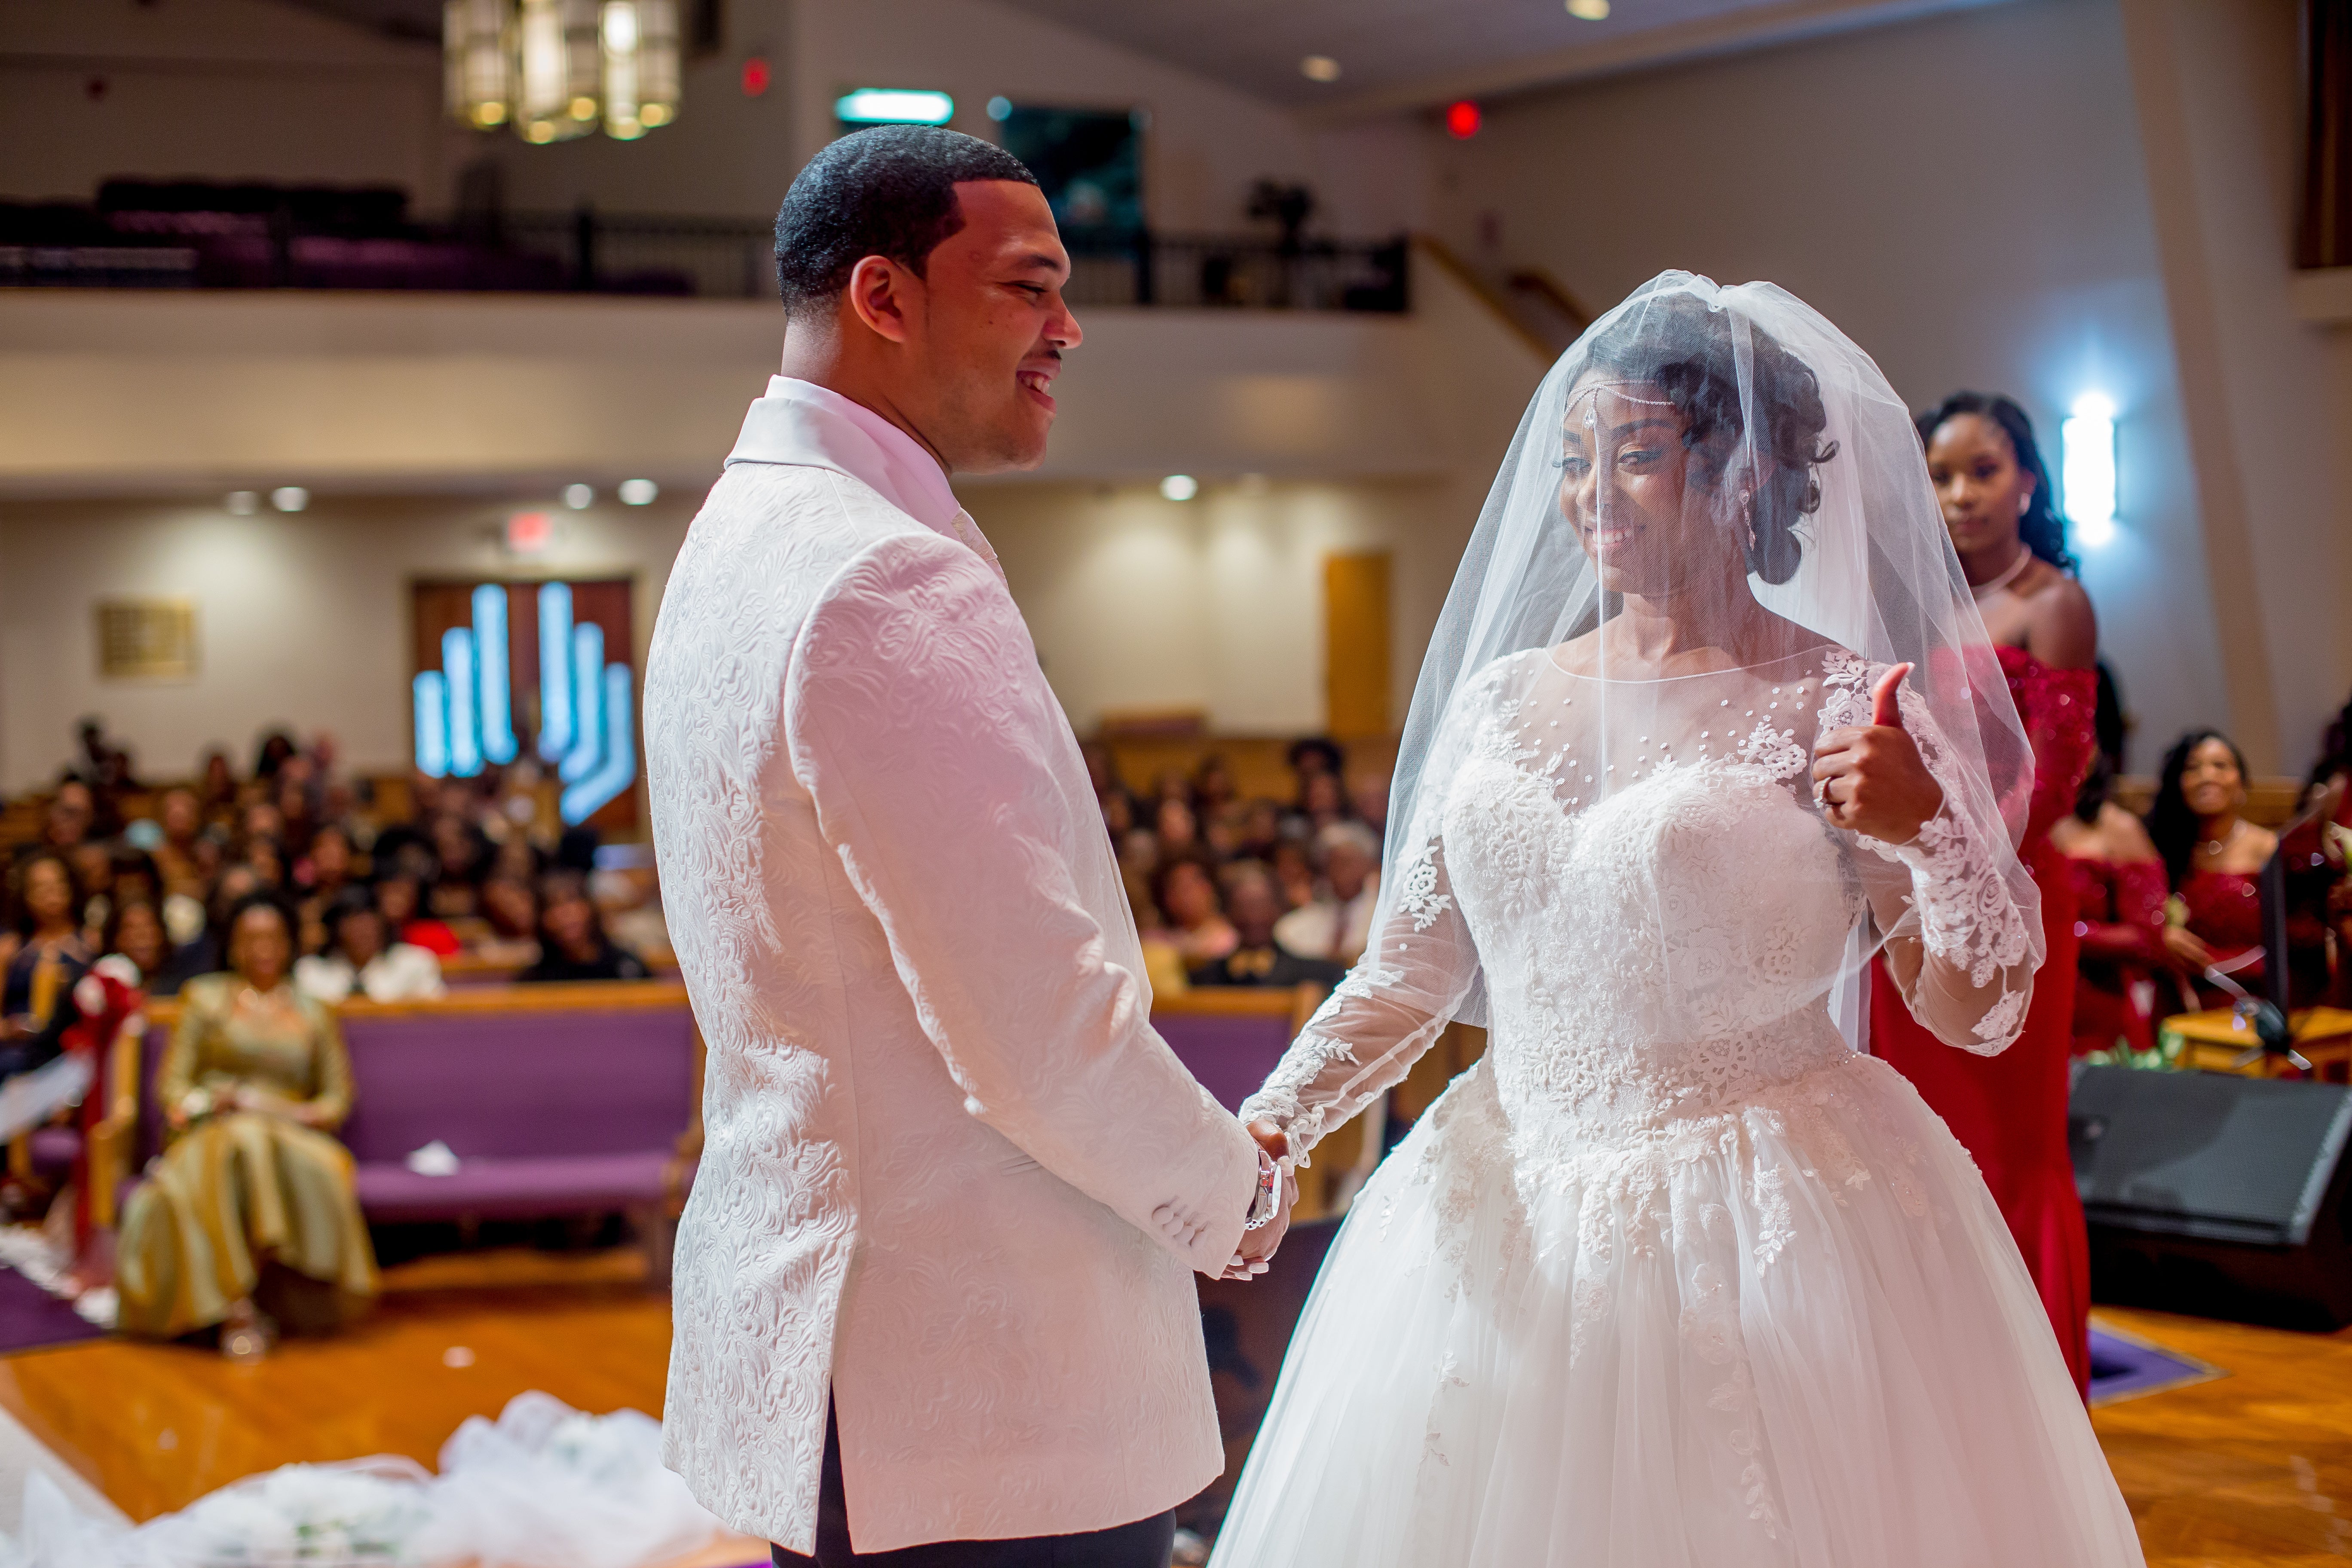 Bridal Bliss: Justin And Shardae's Gorgeous New York Wedding Was Rich With Tradition
